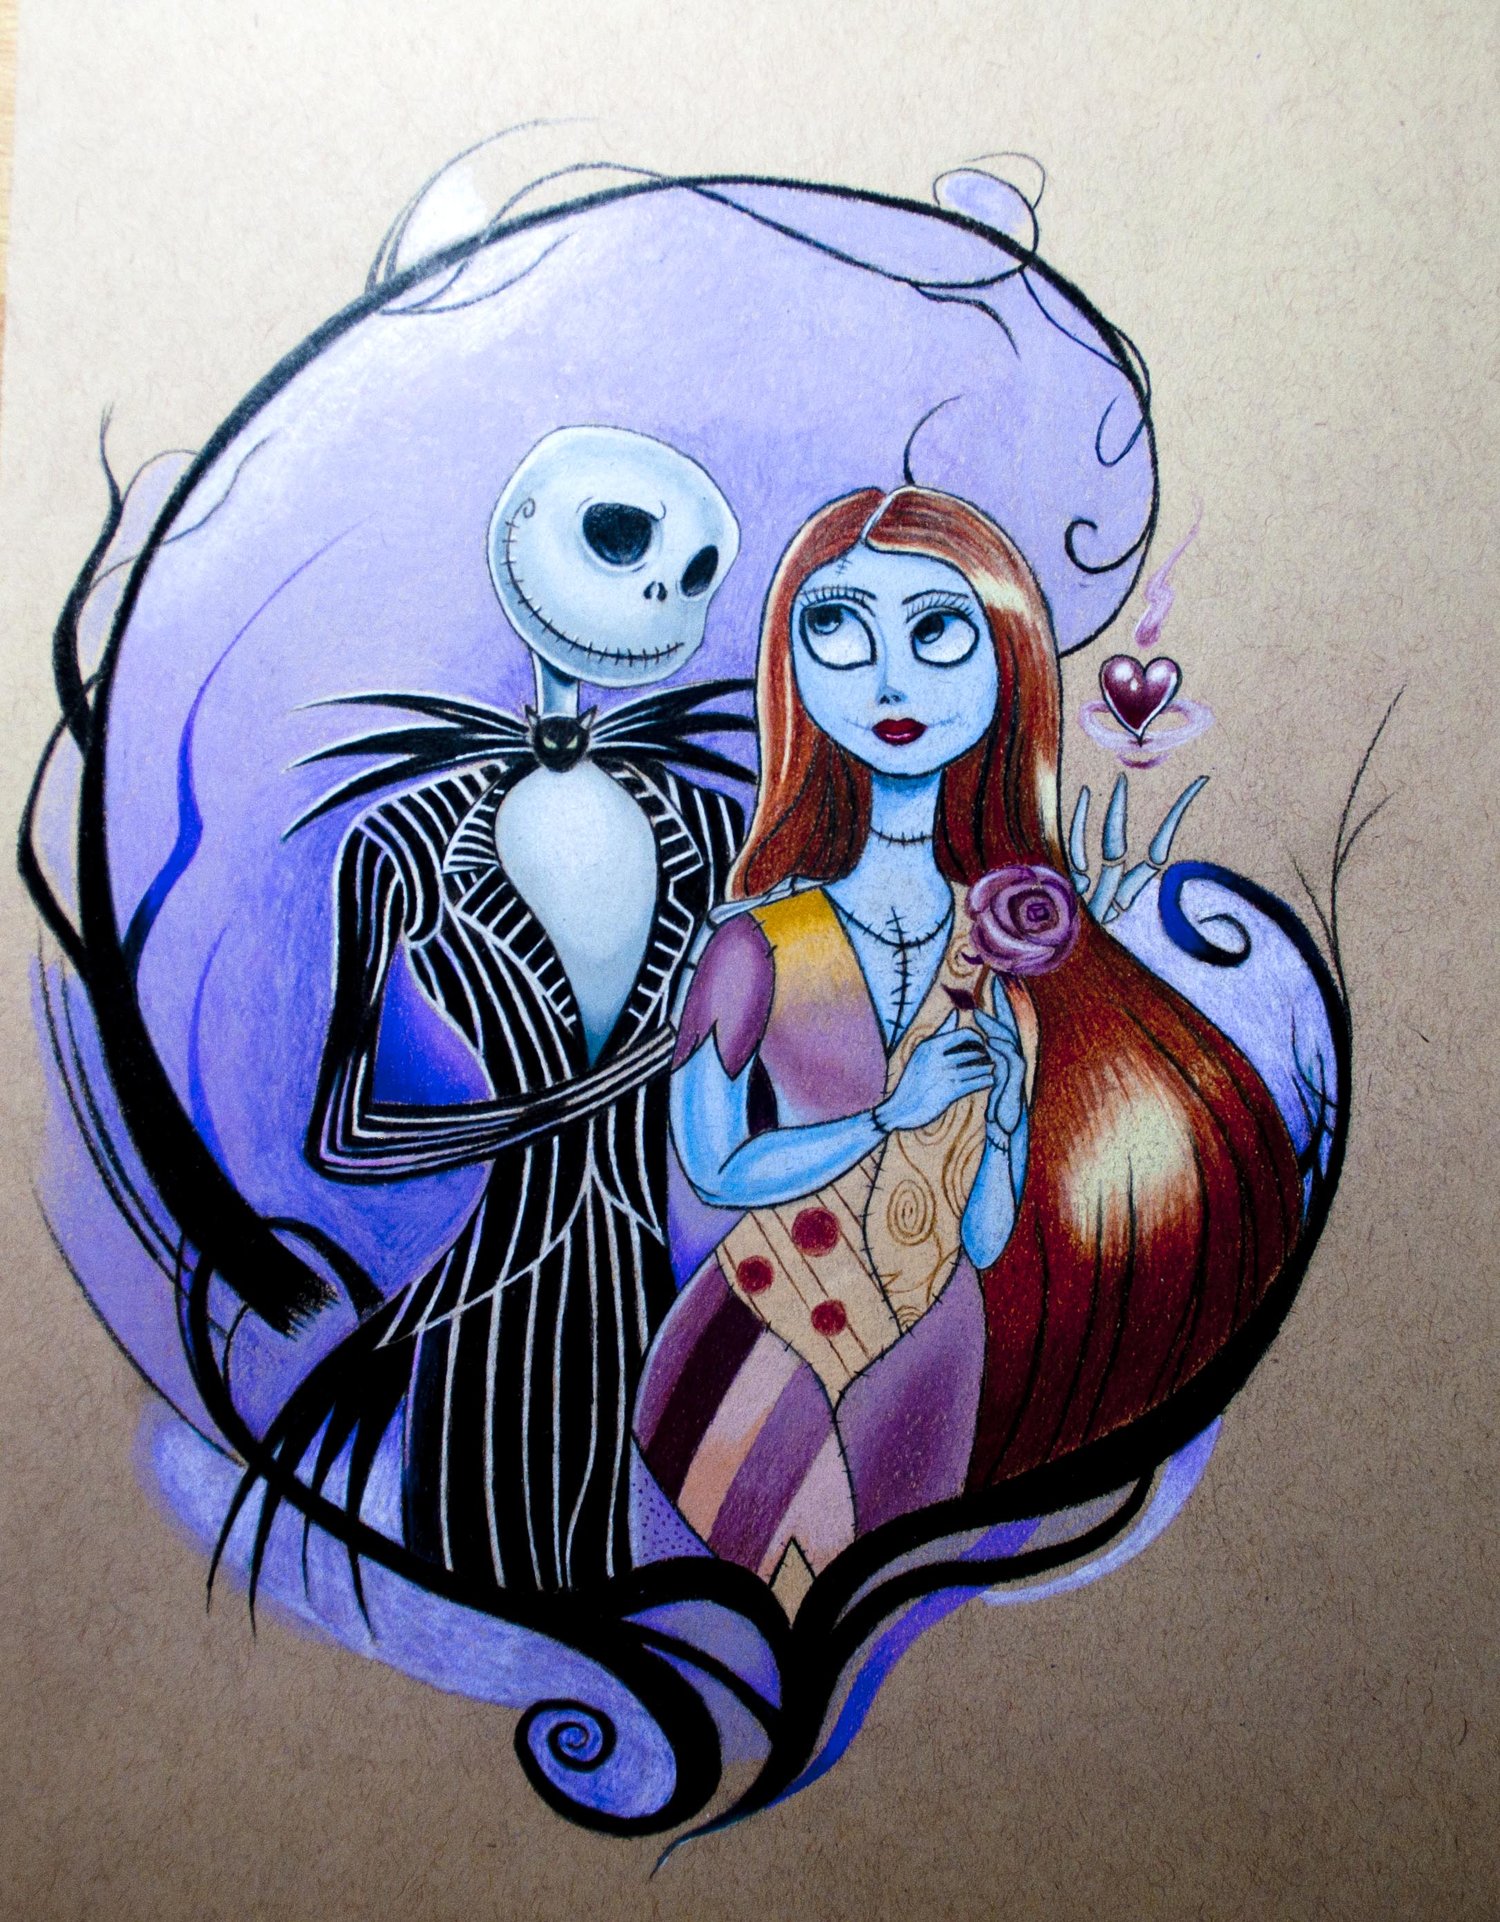 she came up with the idea to draw The Corpse Bride.&nbsp